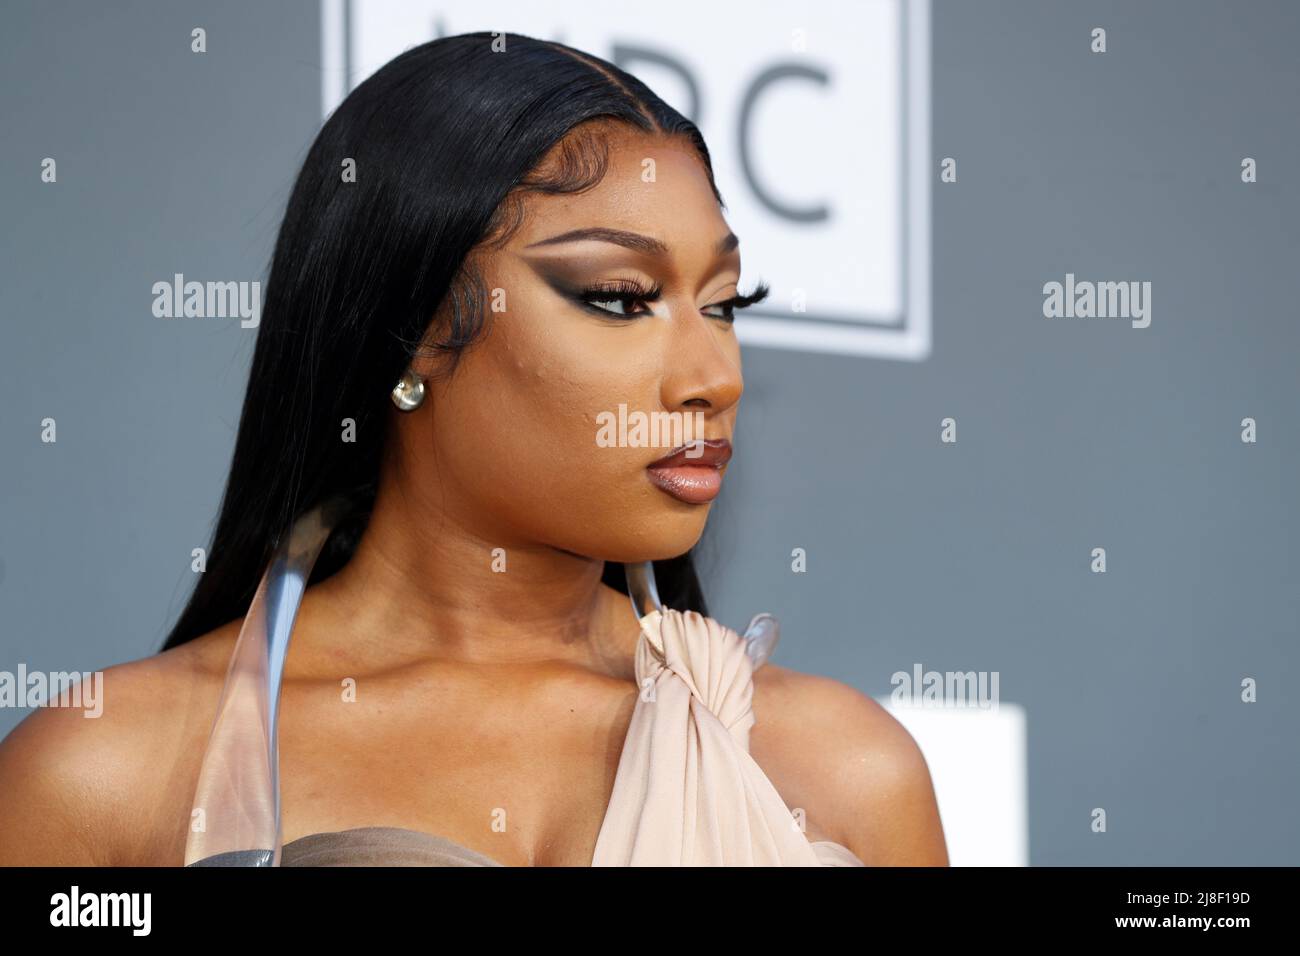 Megan Thee Stallion arrives to attend the 2022 Billboard Music Awards at MGM Grand Garden Arena in Las Vegas, Nevada, U.S. May 15, 2022. REUTERS/Steve Marcus Stock Photo